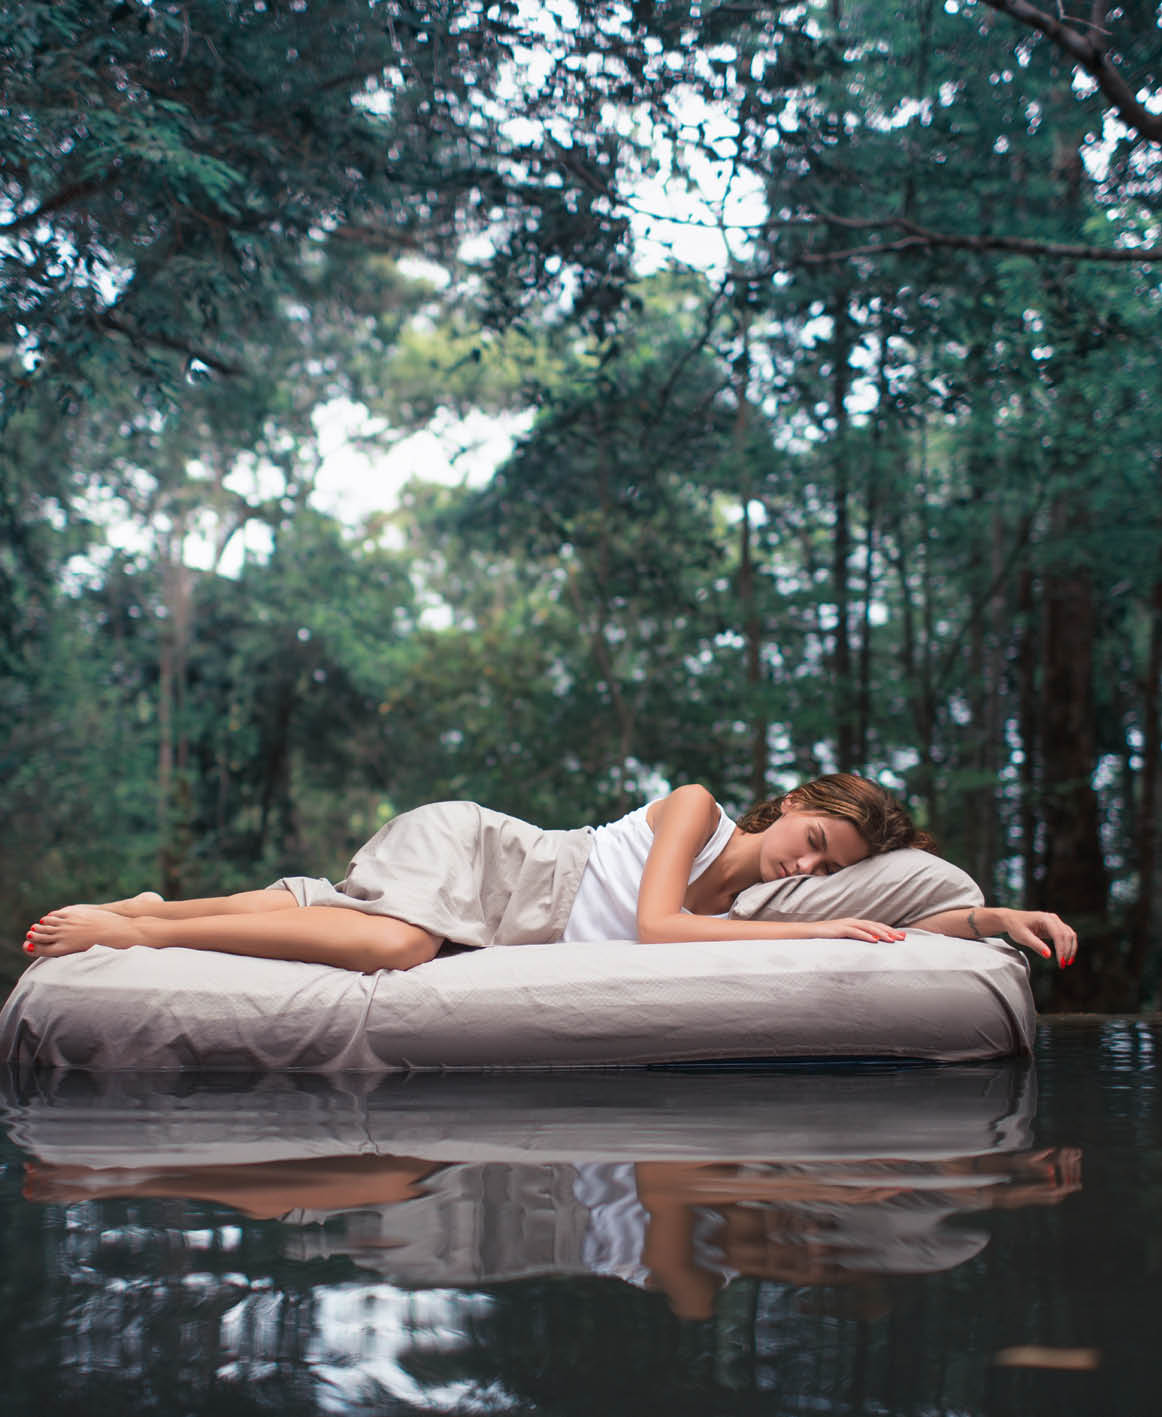 A hidden place  Sleeping woman in deep forest lies on airbed